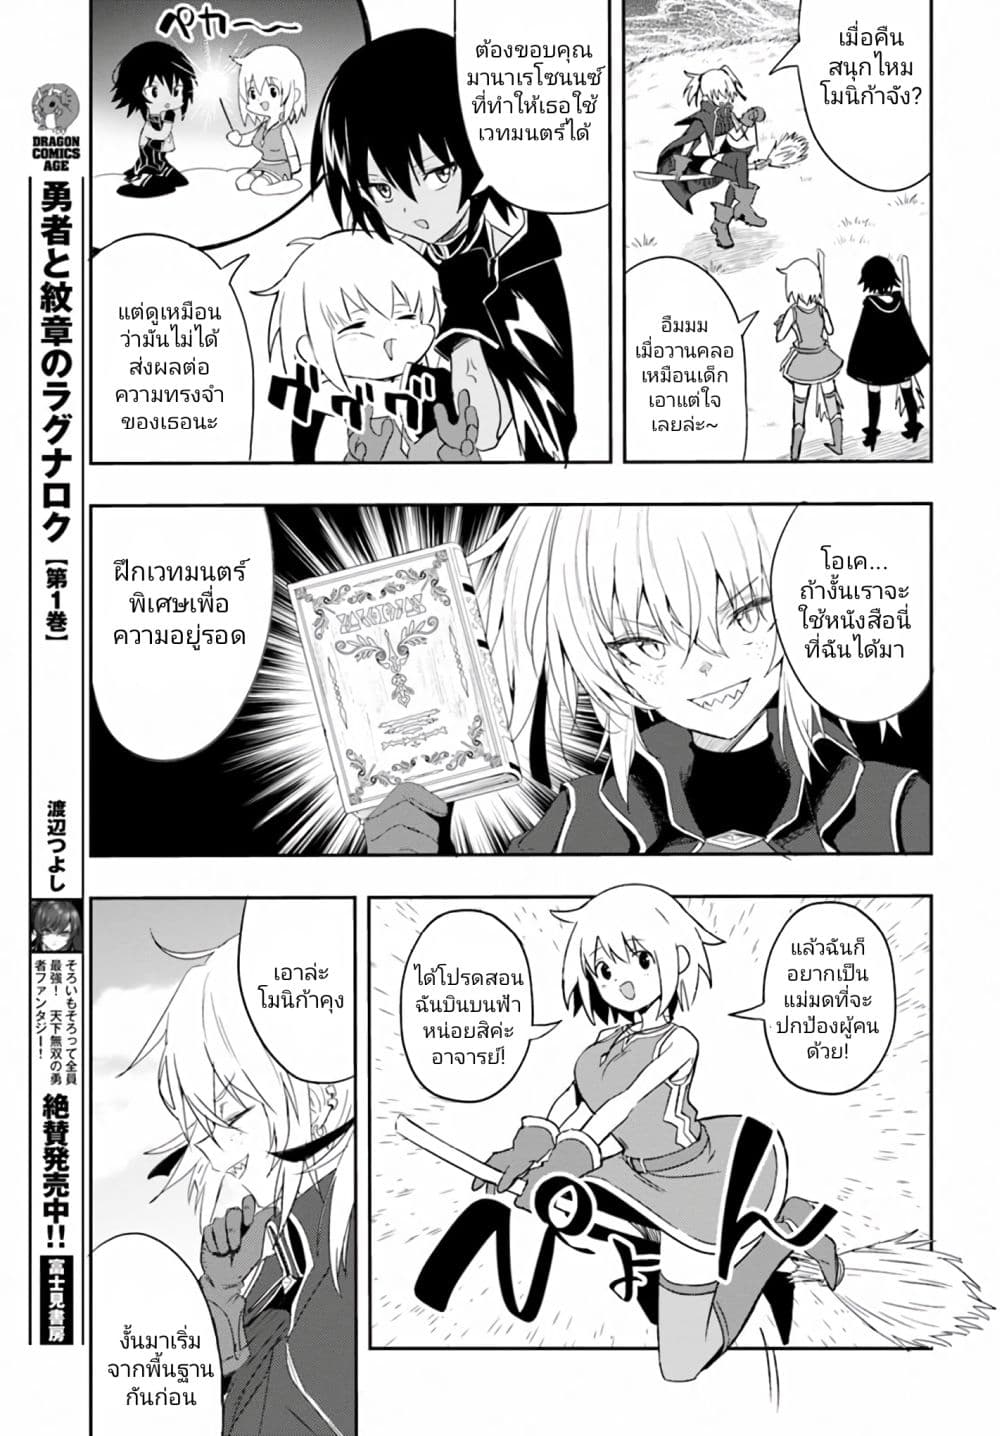 Witch Guild Fantasia 6 (17)